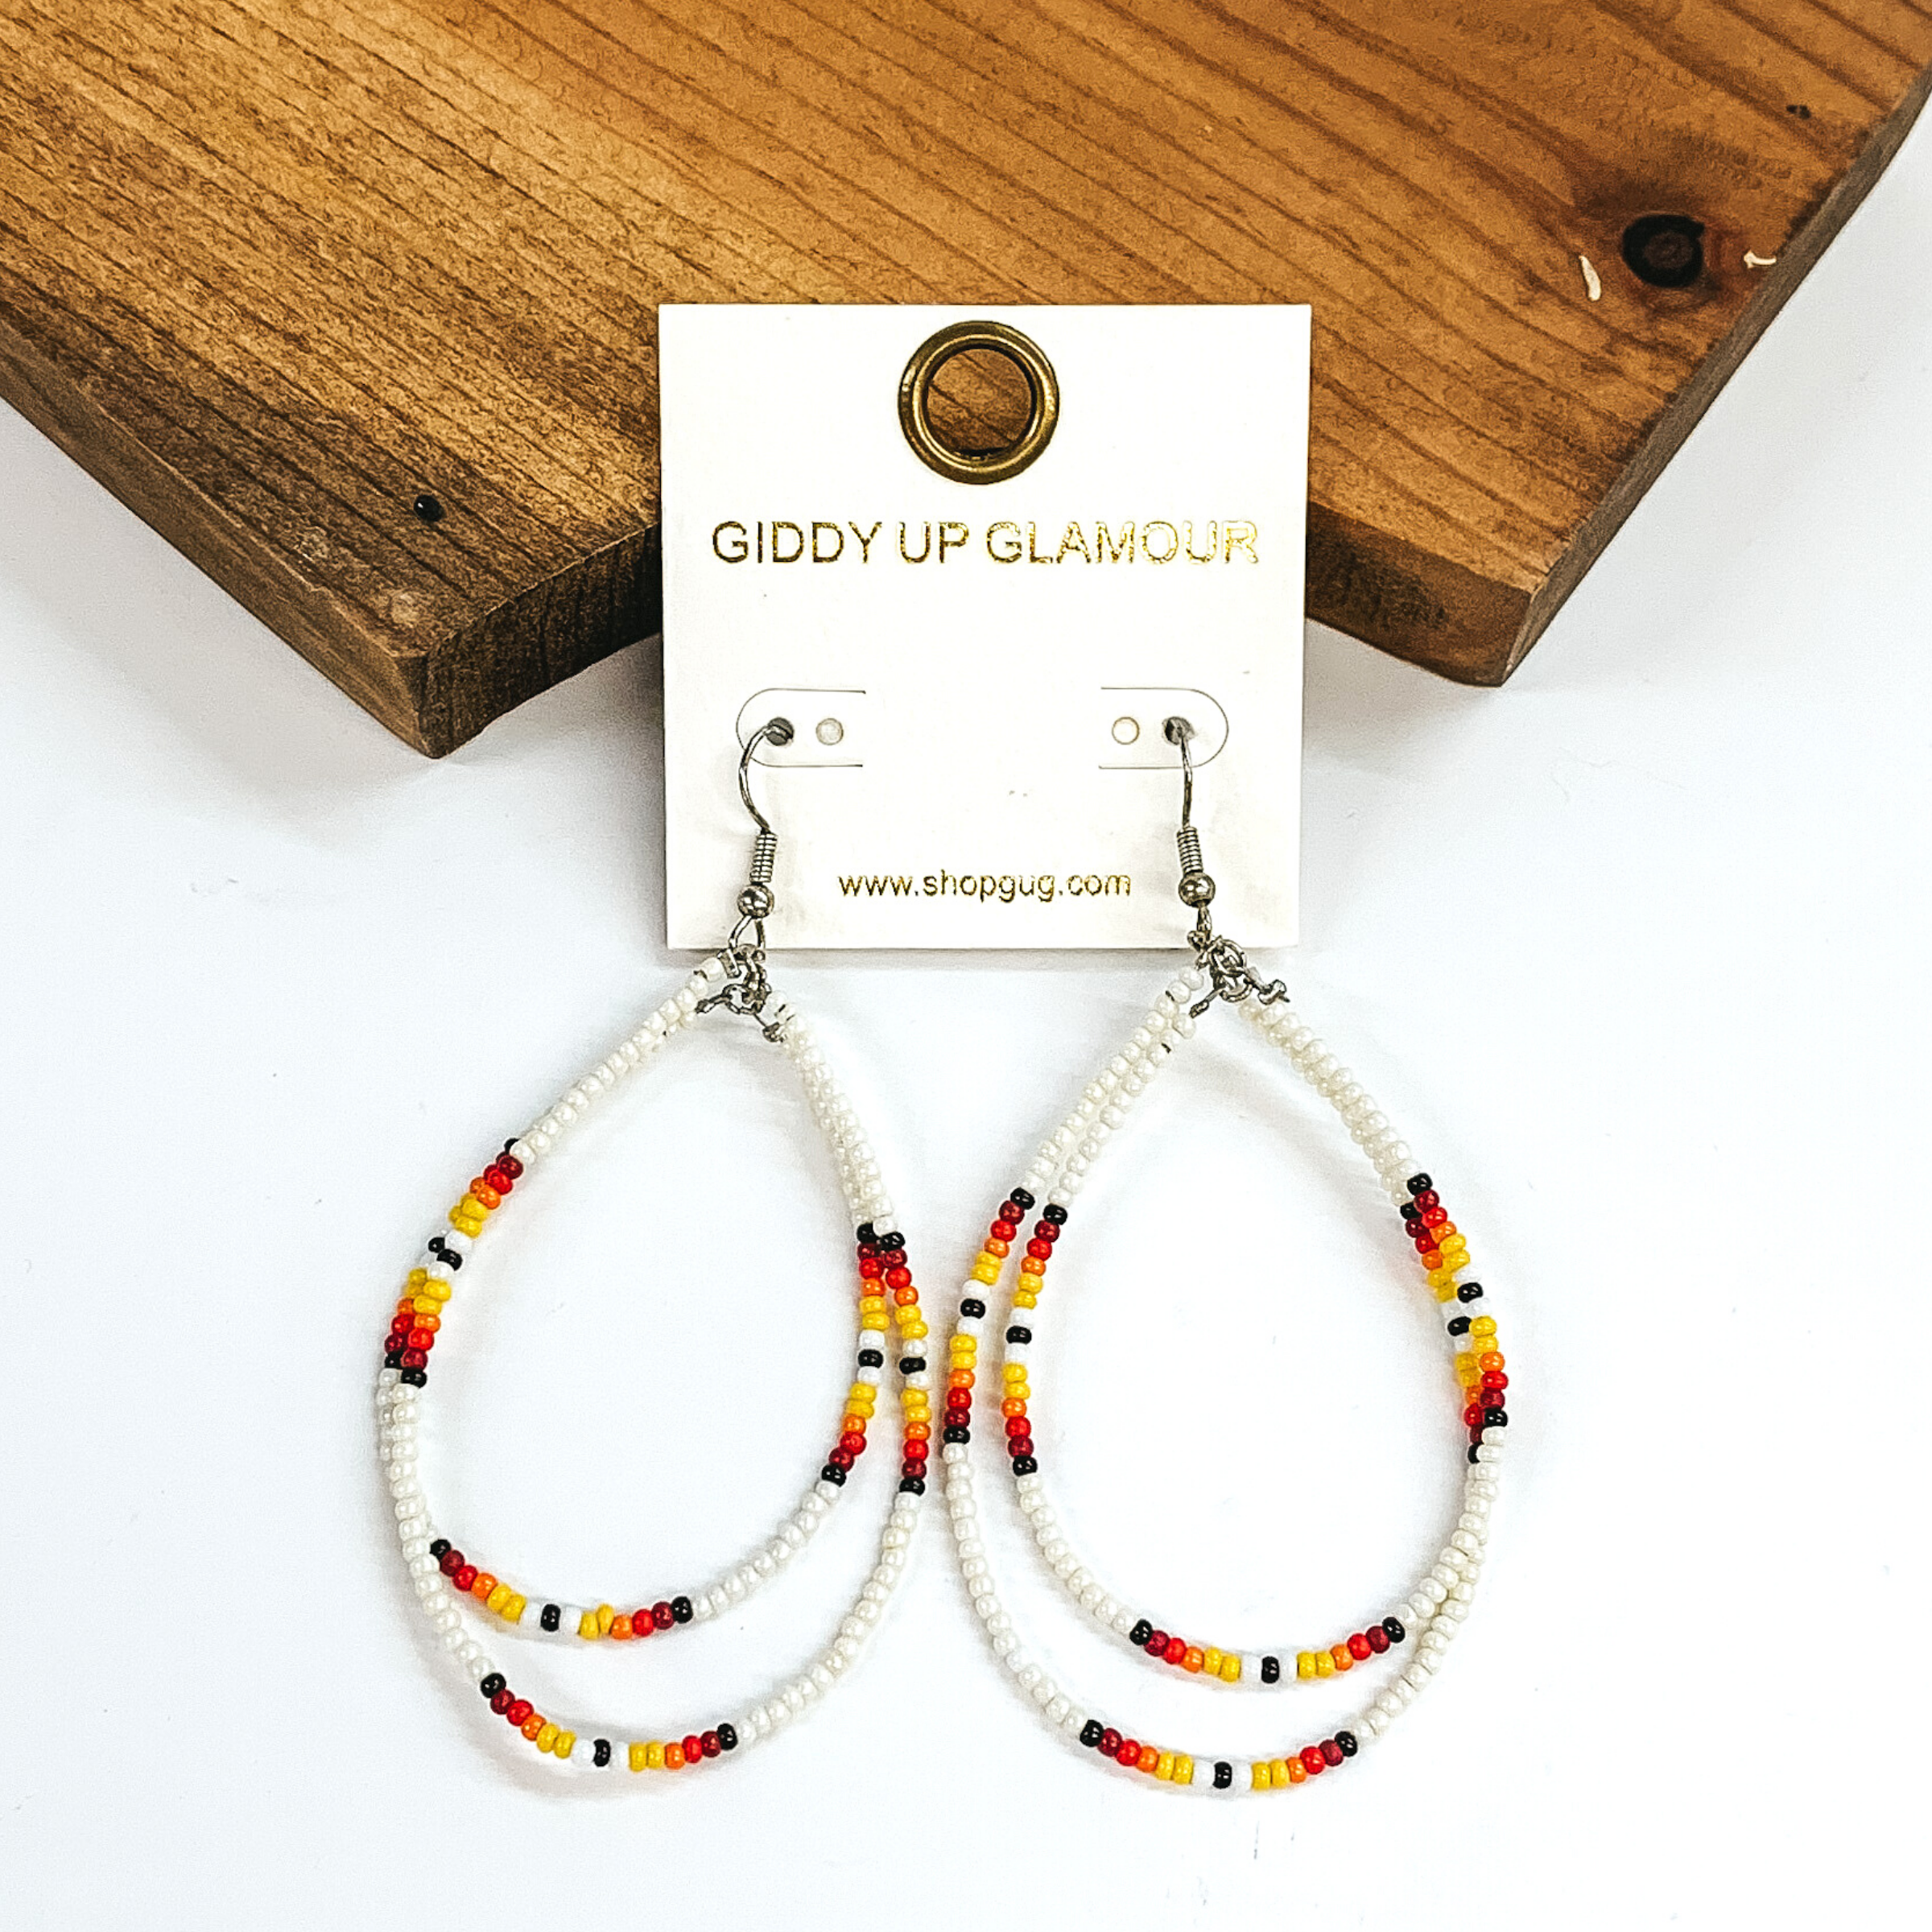 Double layered, hanging beaded teardrop earrings. The majority of the beads are white with three segements including maroon, red, yellow, white, and black beads. hese earrings are pictured on a white background in front of a dark piece of wood. 